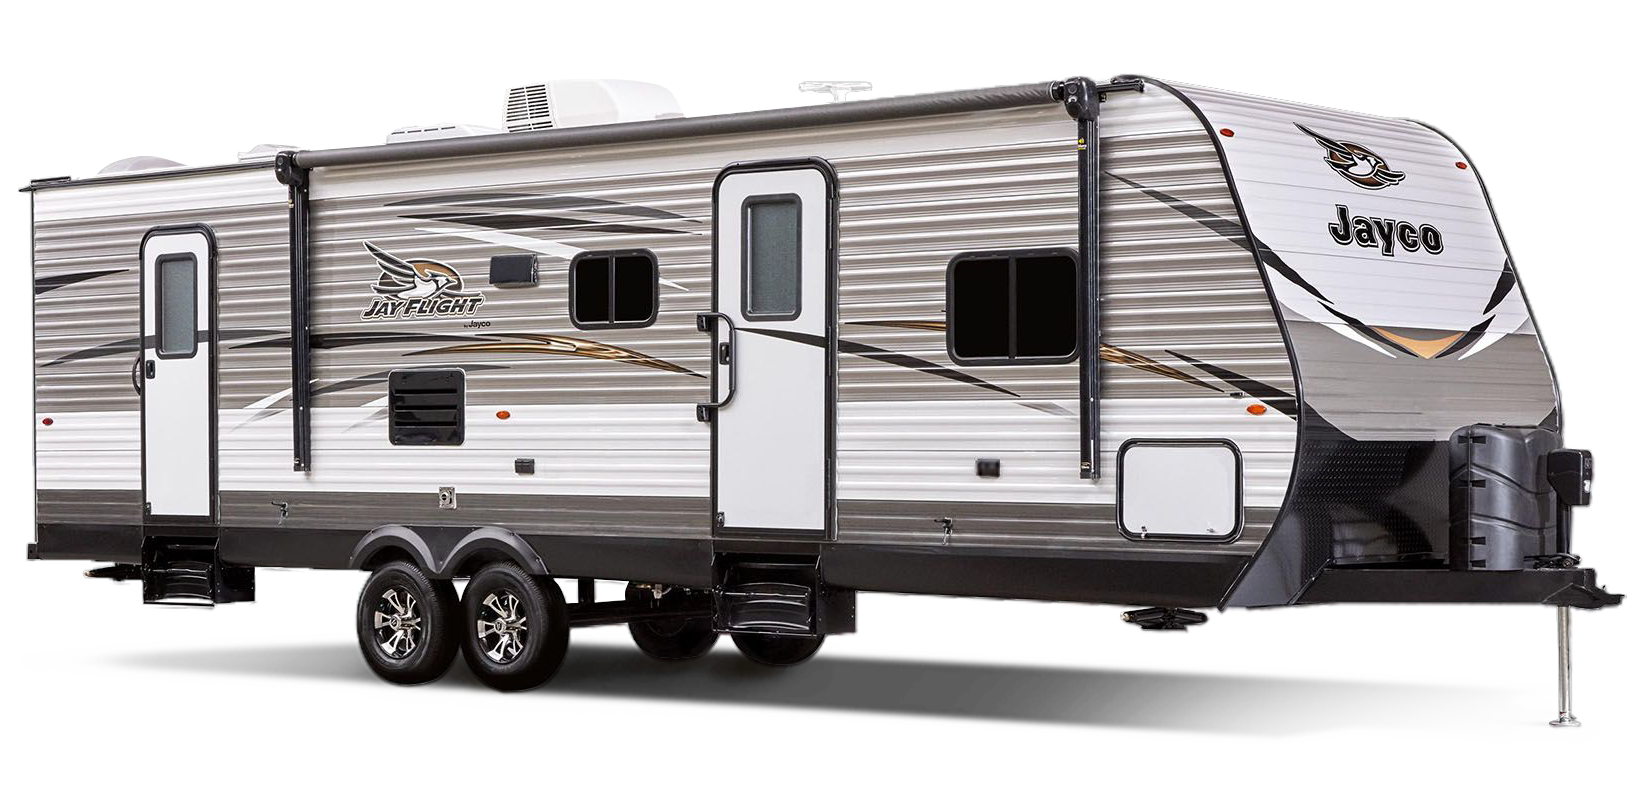 Park your RV at Scofield Mountain Estates for two weeks per year.